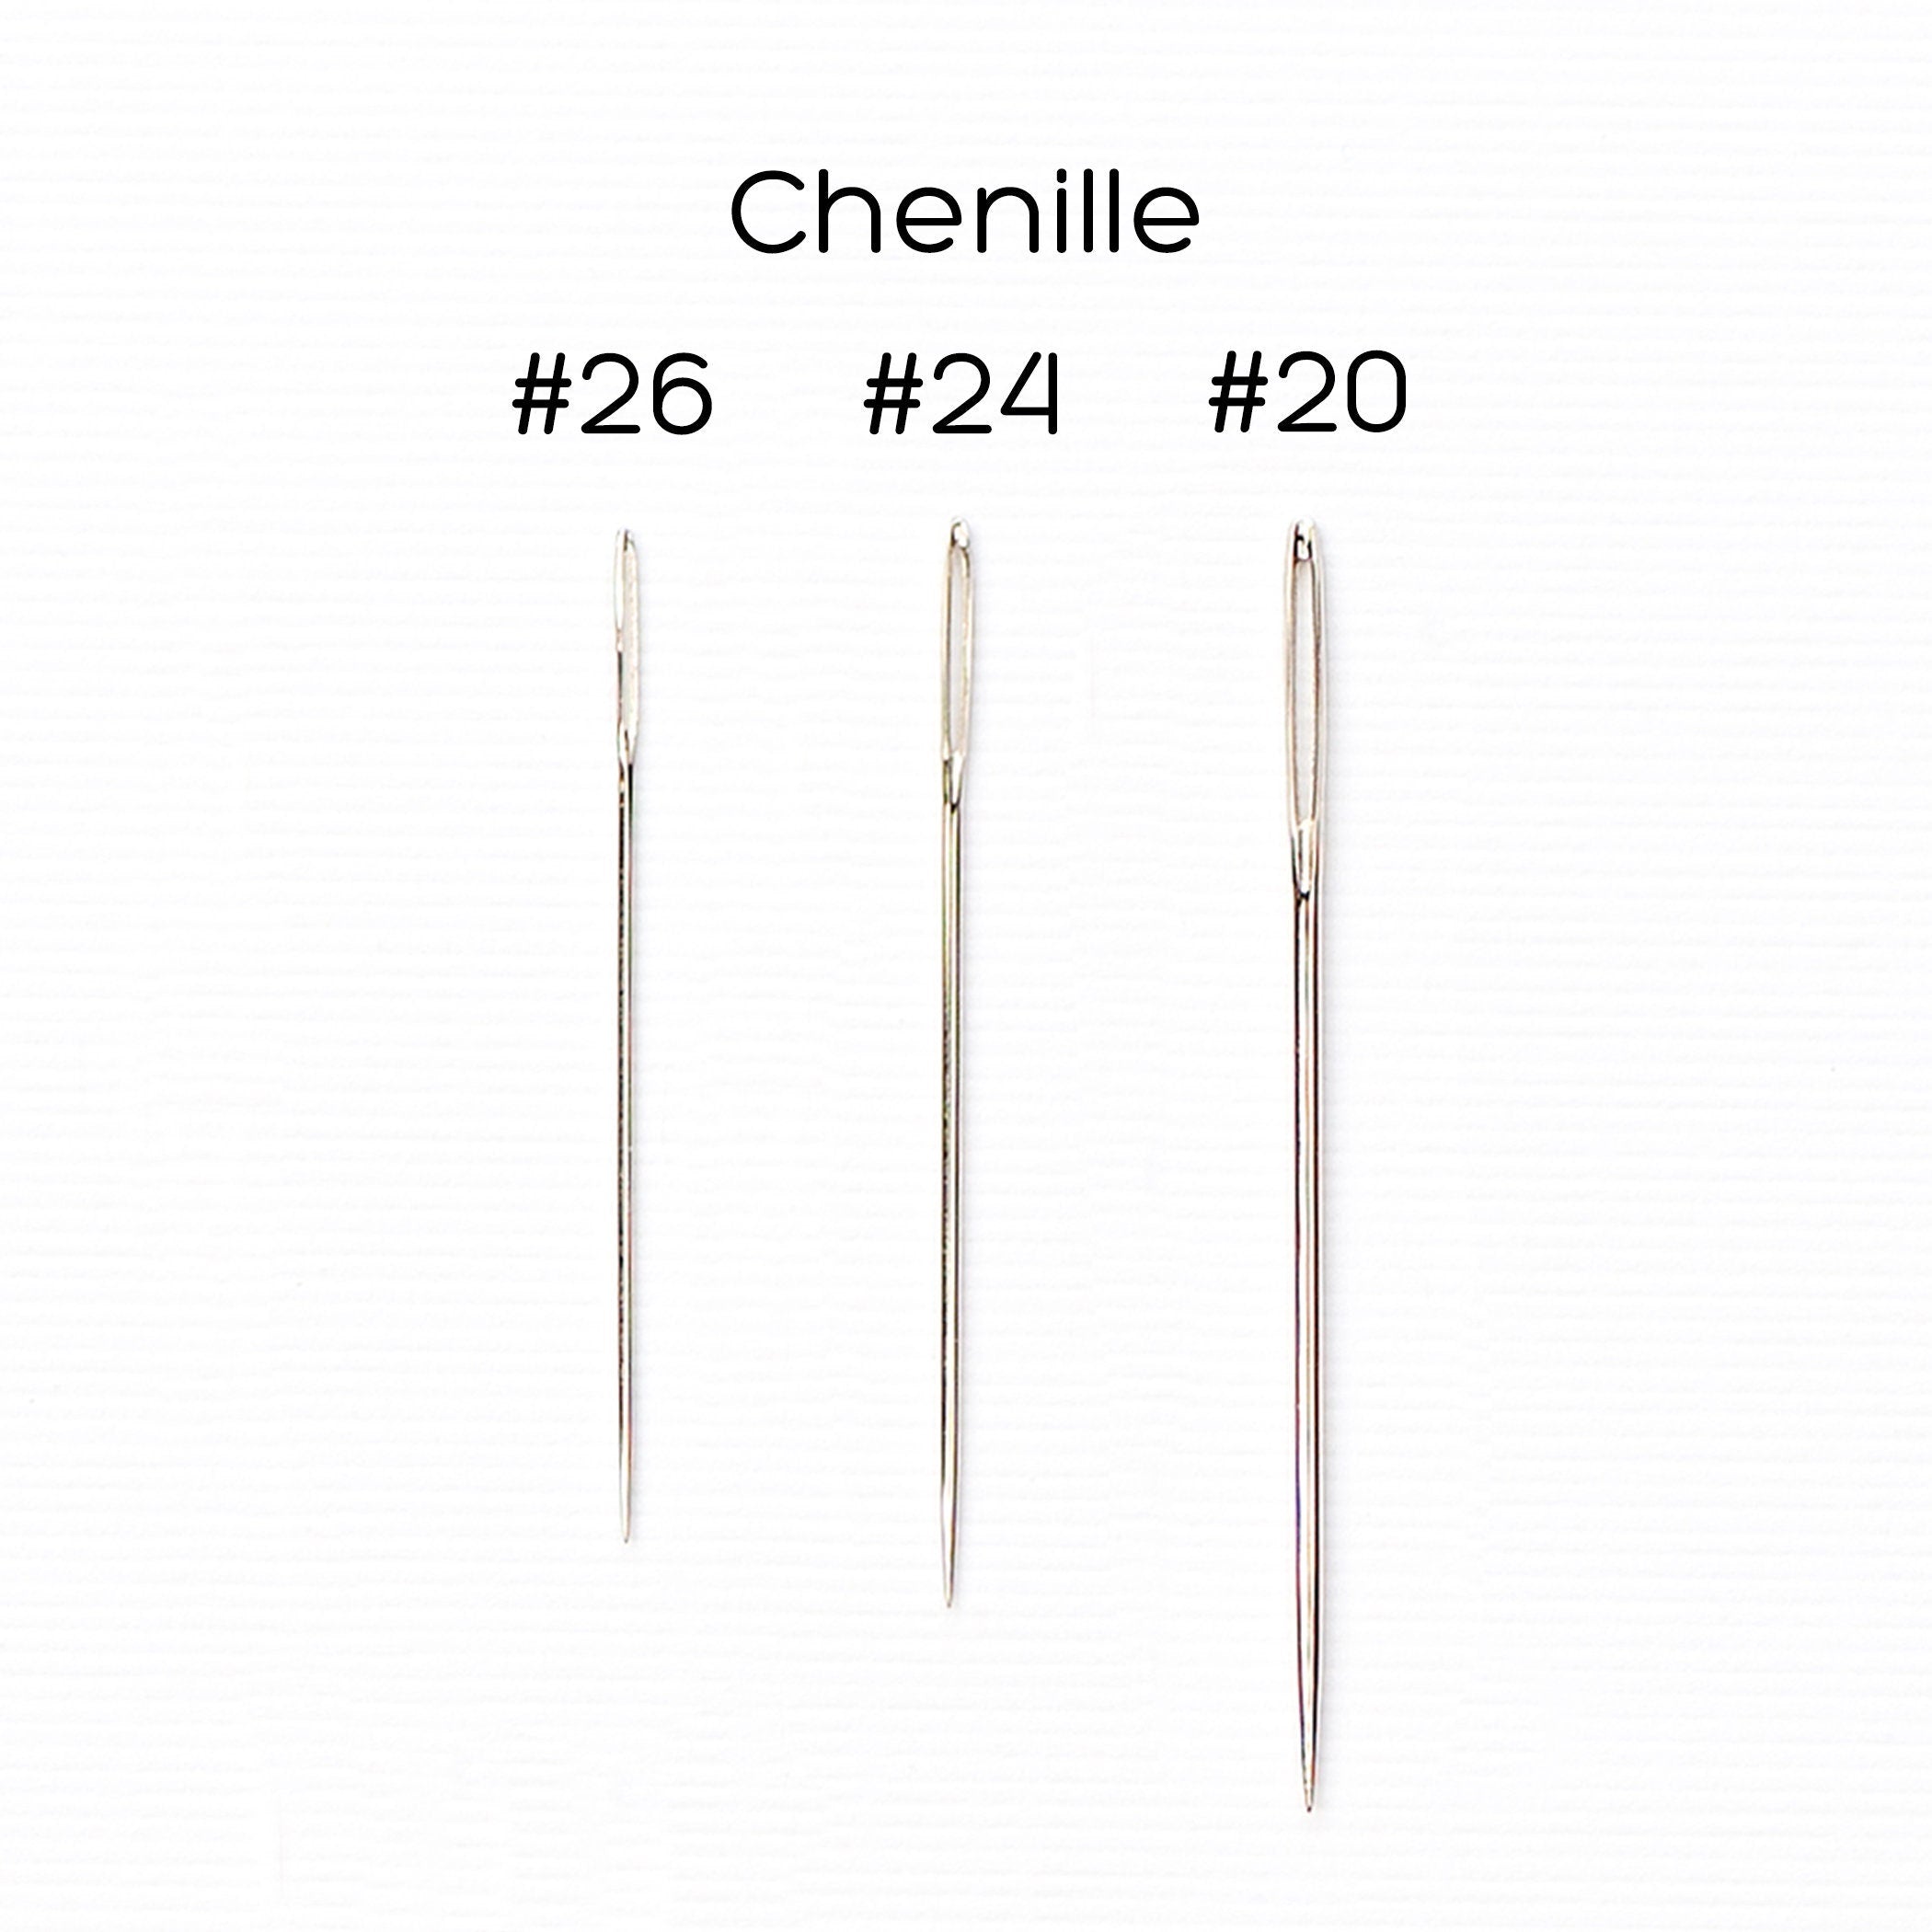 Stainless Steel Hand Sewing Needles at Rs 33/piece in Mumbai